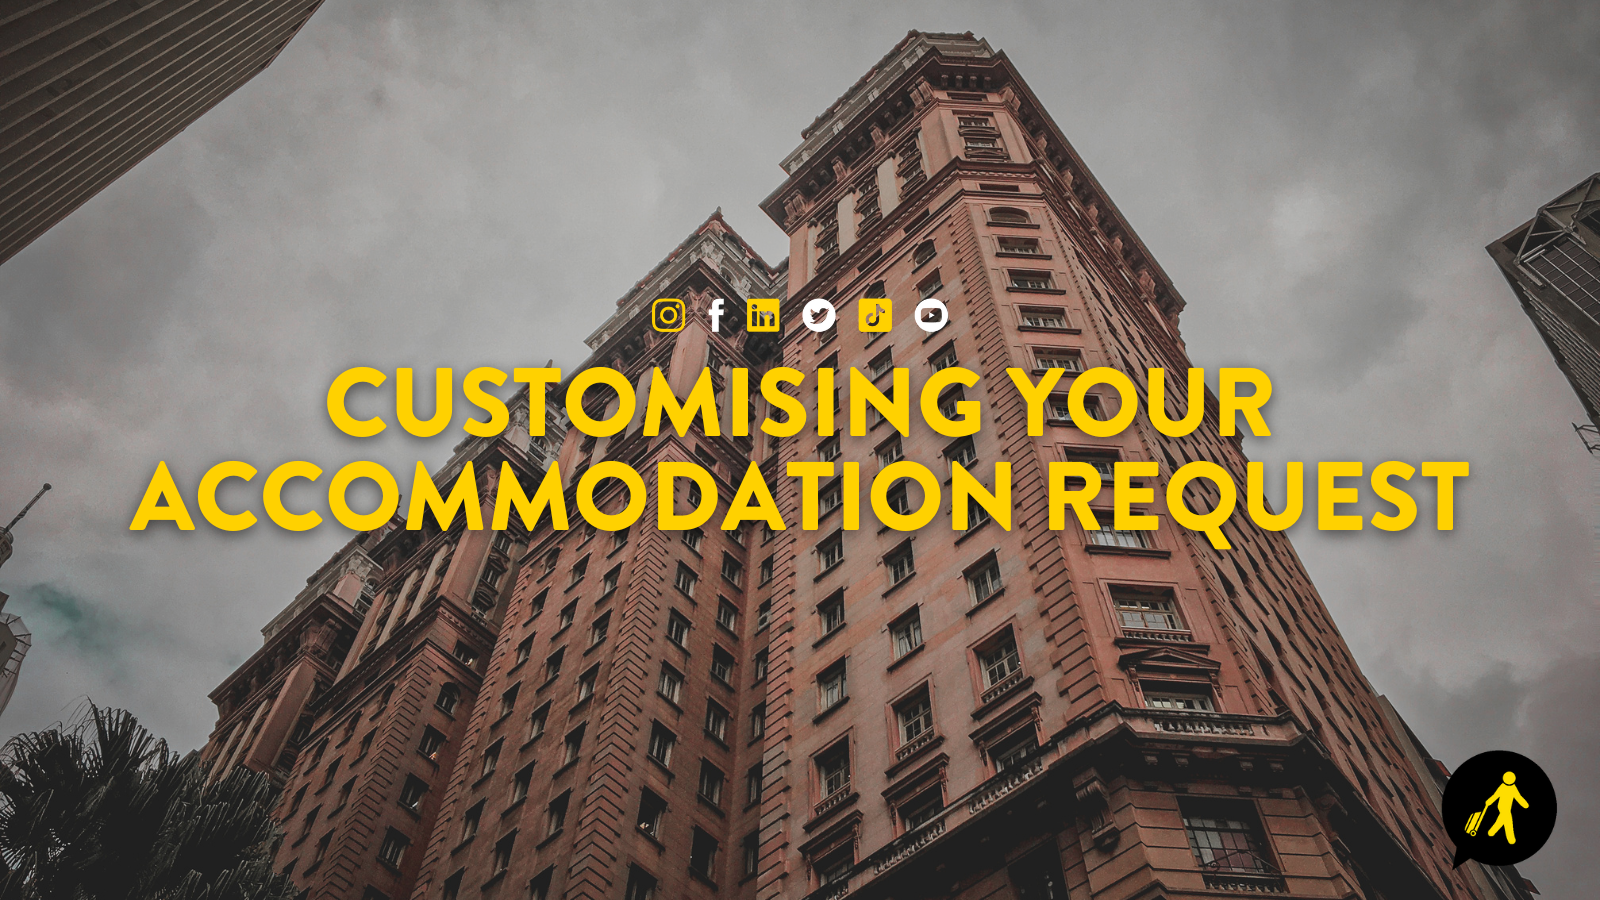 Customising your accommodation request